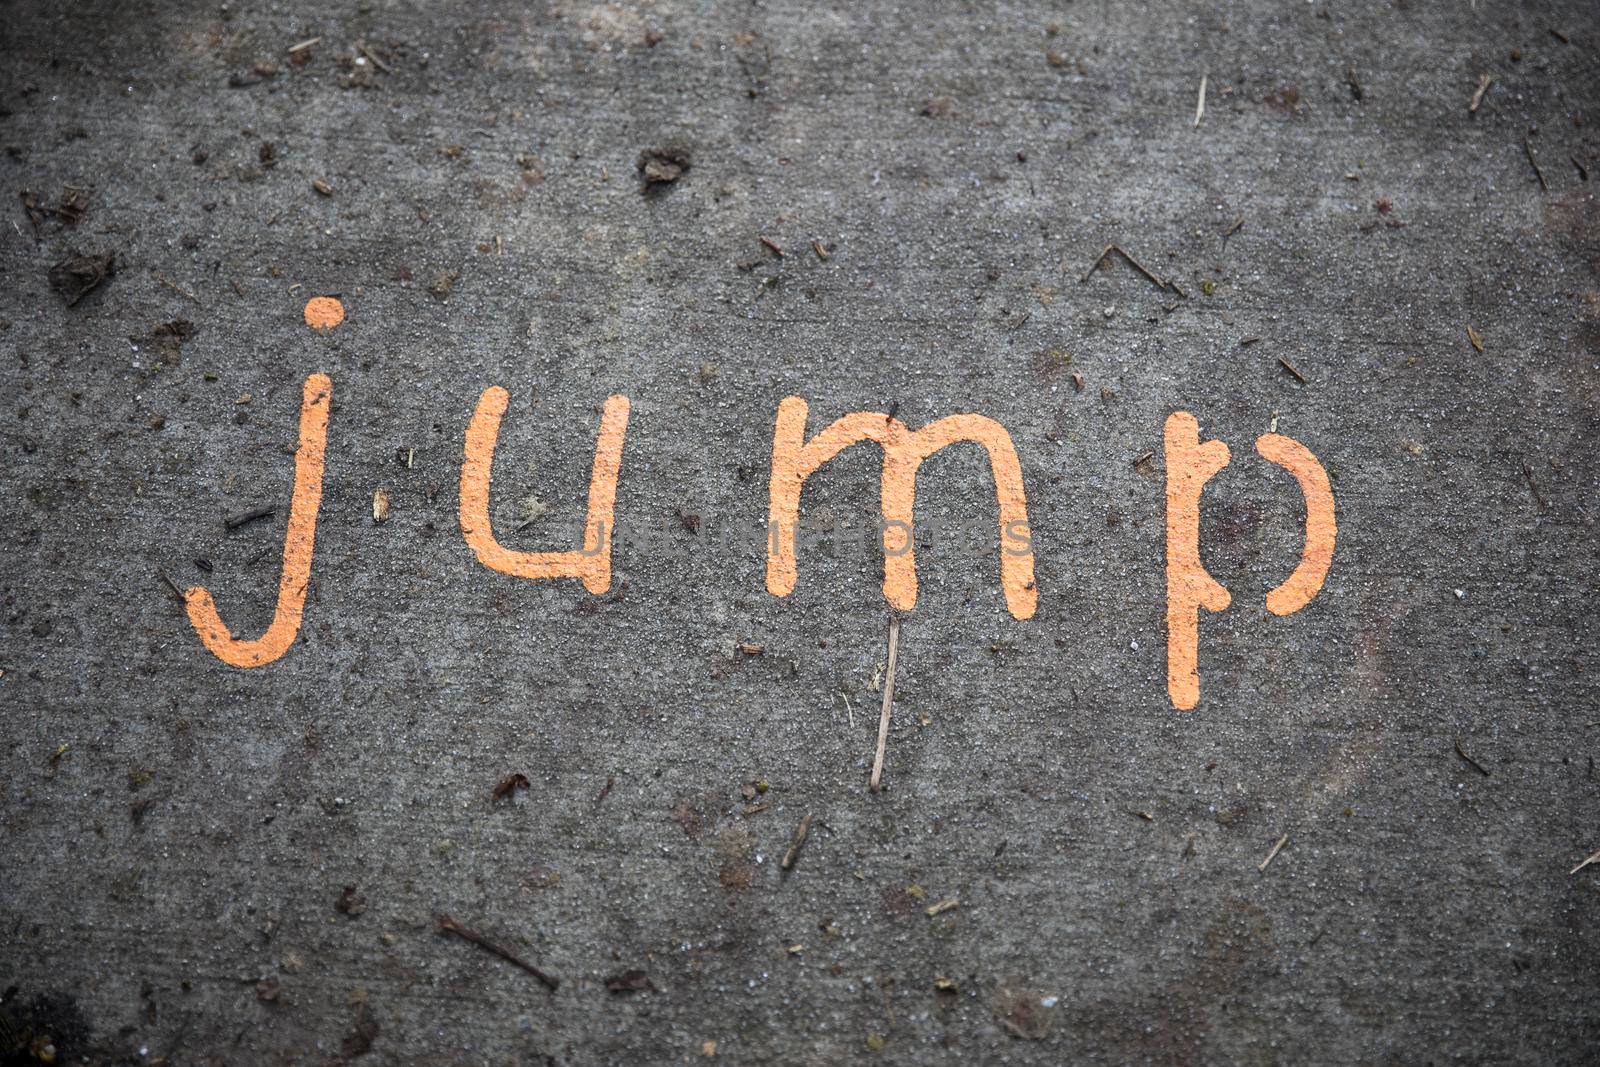 The word jump painted on a concrete sidewalk